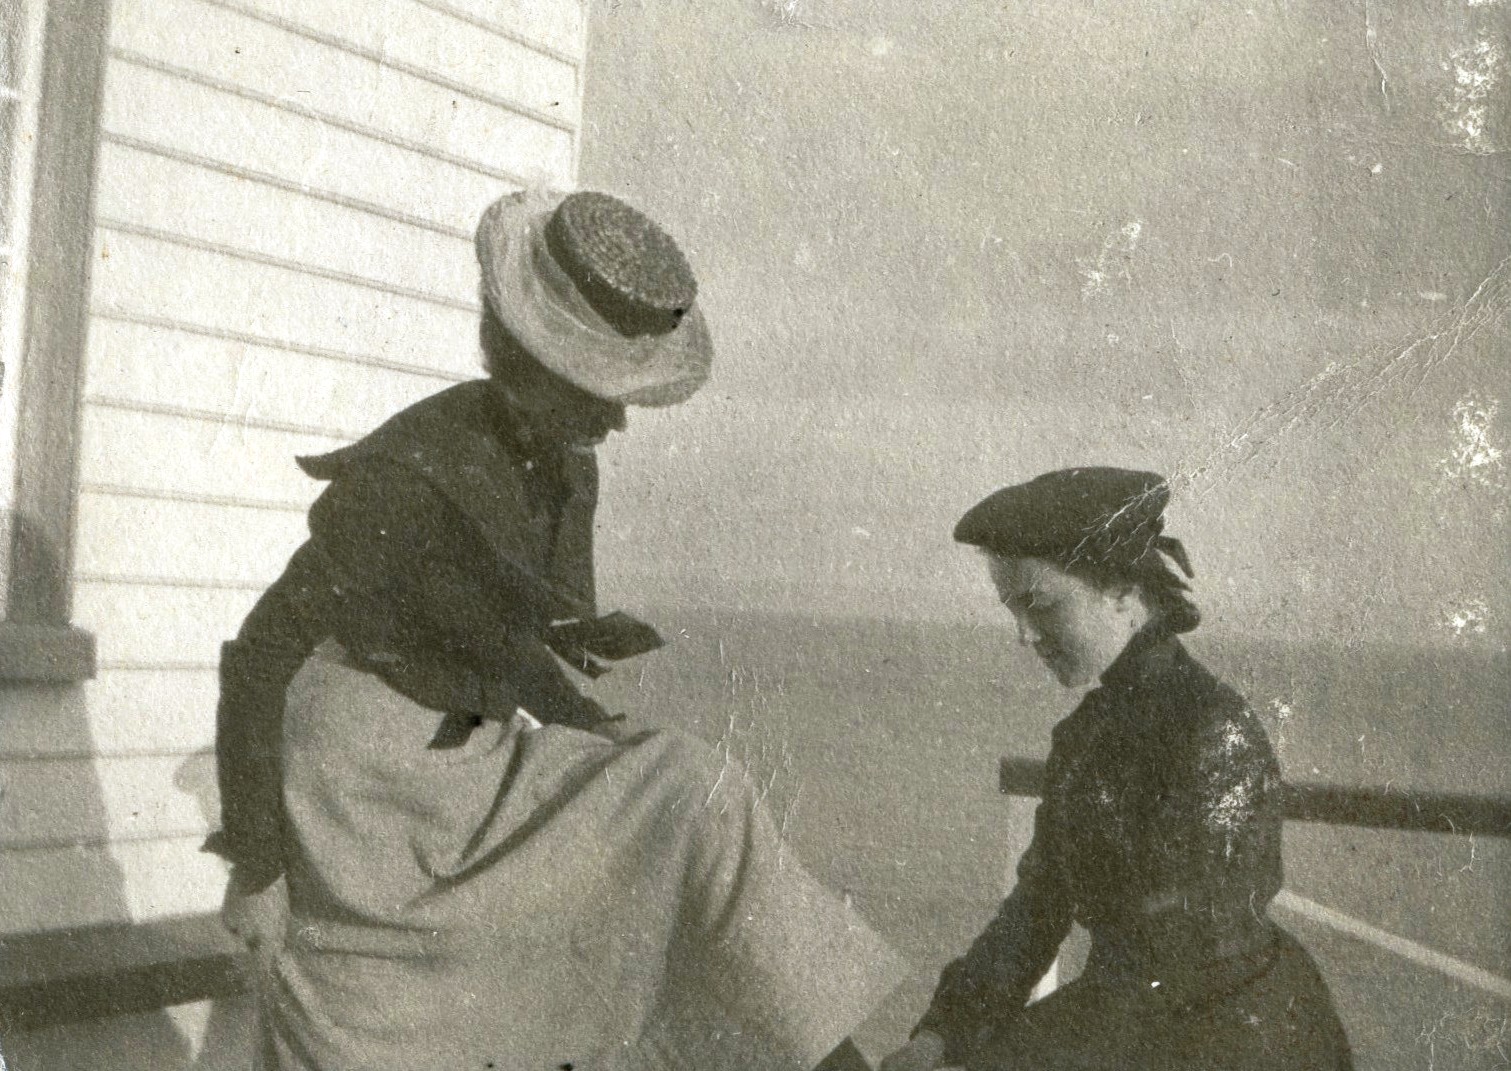 A young woman laces the shoes of a seated woman.